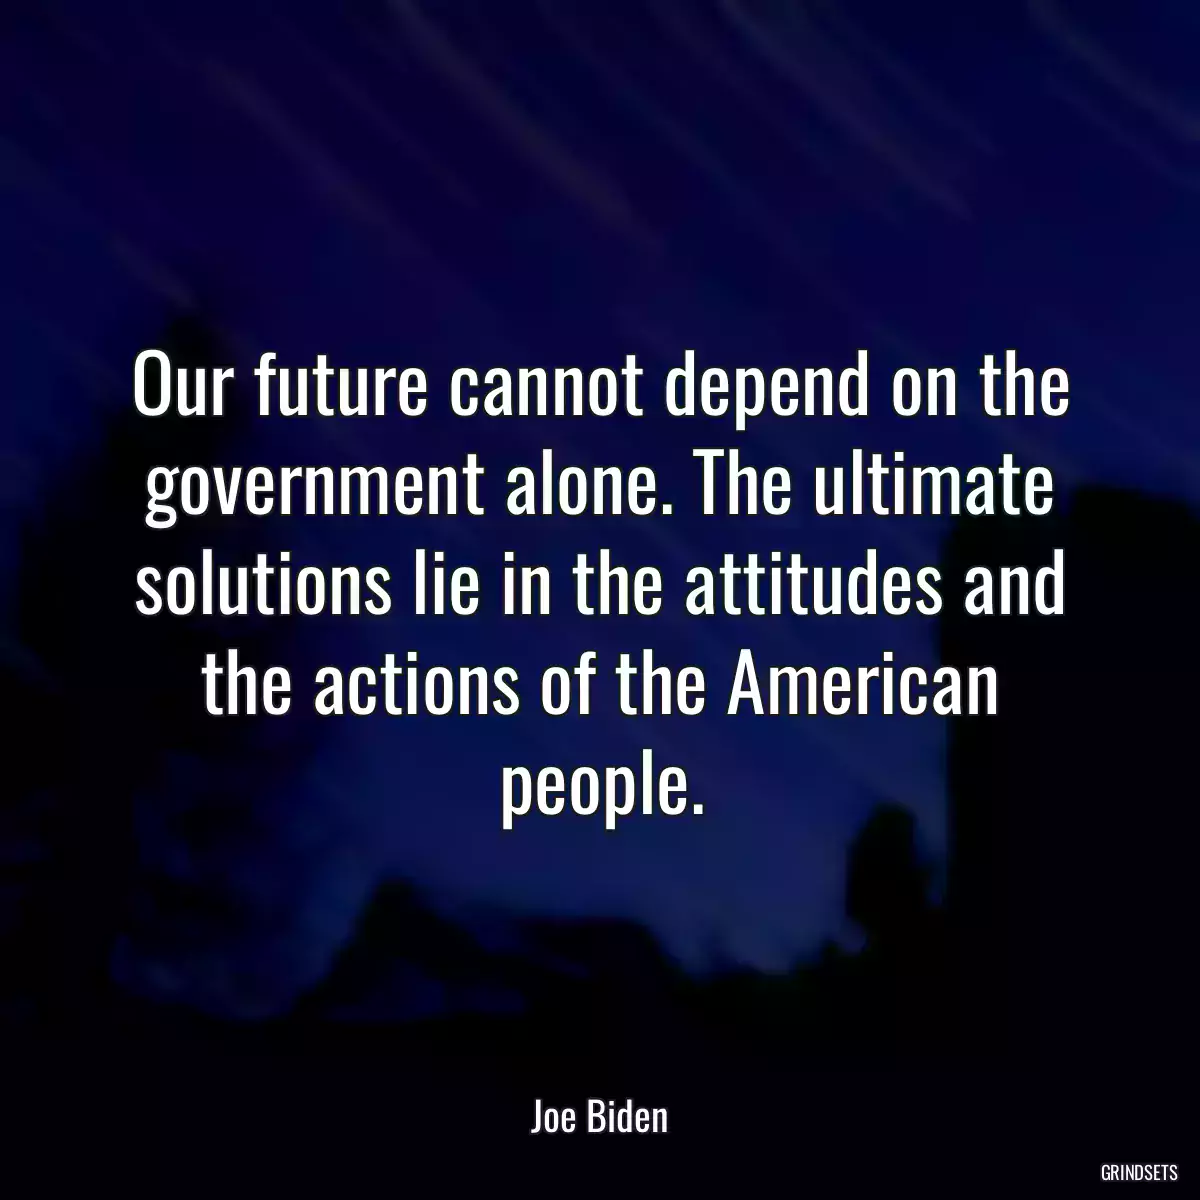 Our future cannot depend on the government alone. The ultimate solutions lie in the attitudes and the actions of the American people.